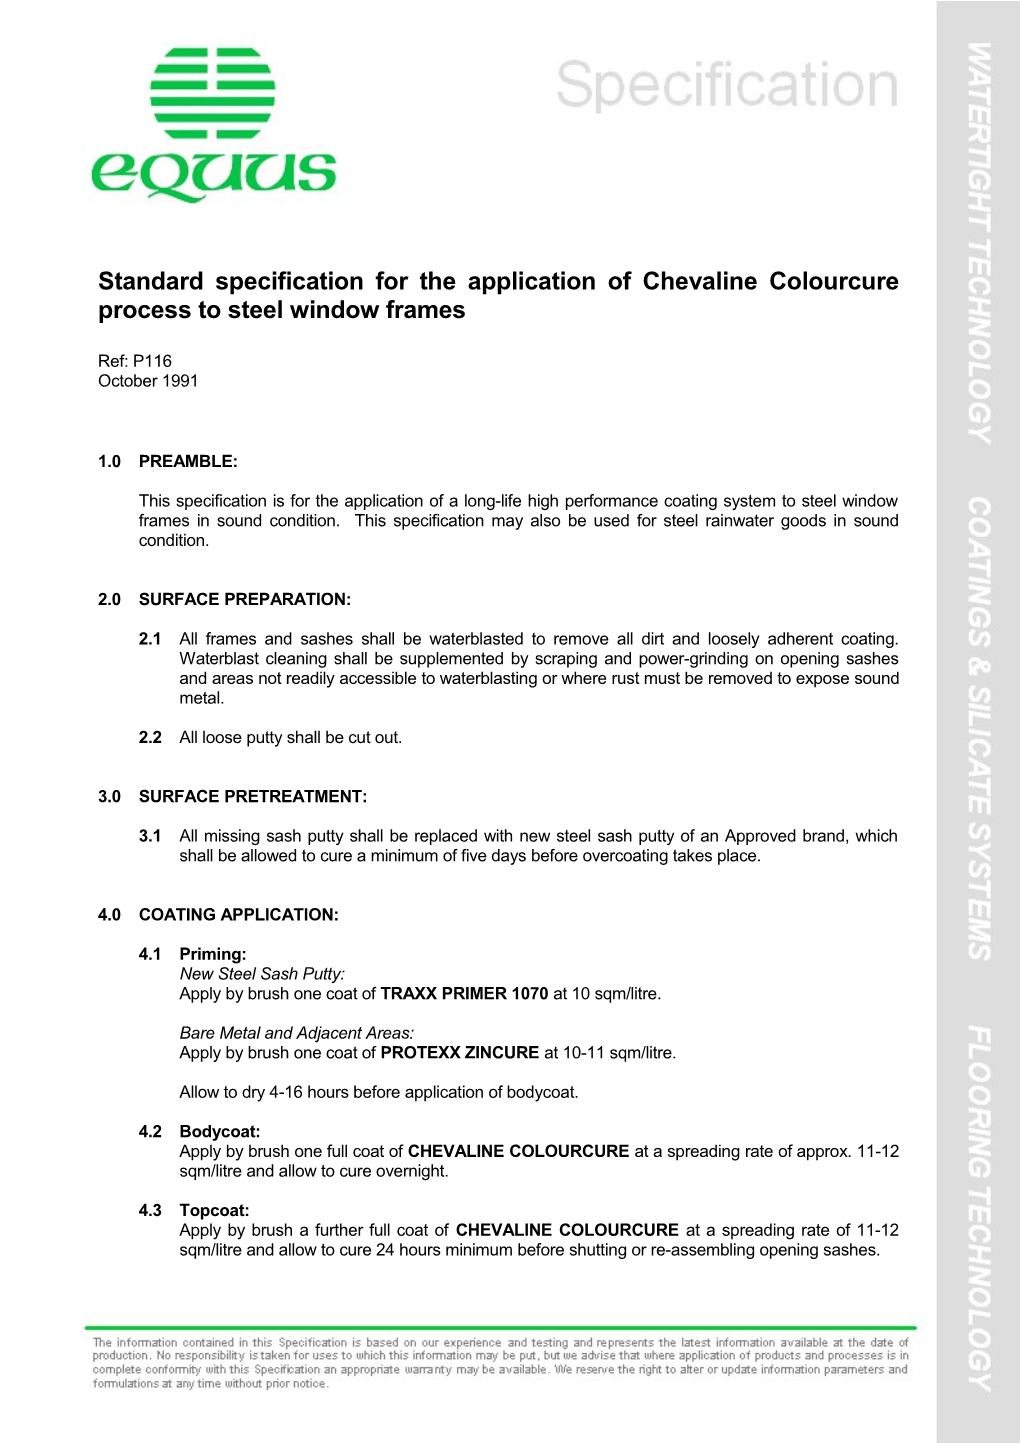 Standard Specification for the Application of Chevaline Colourcure Process to Steel Window